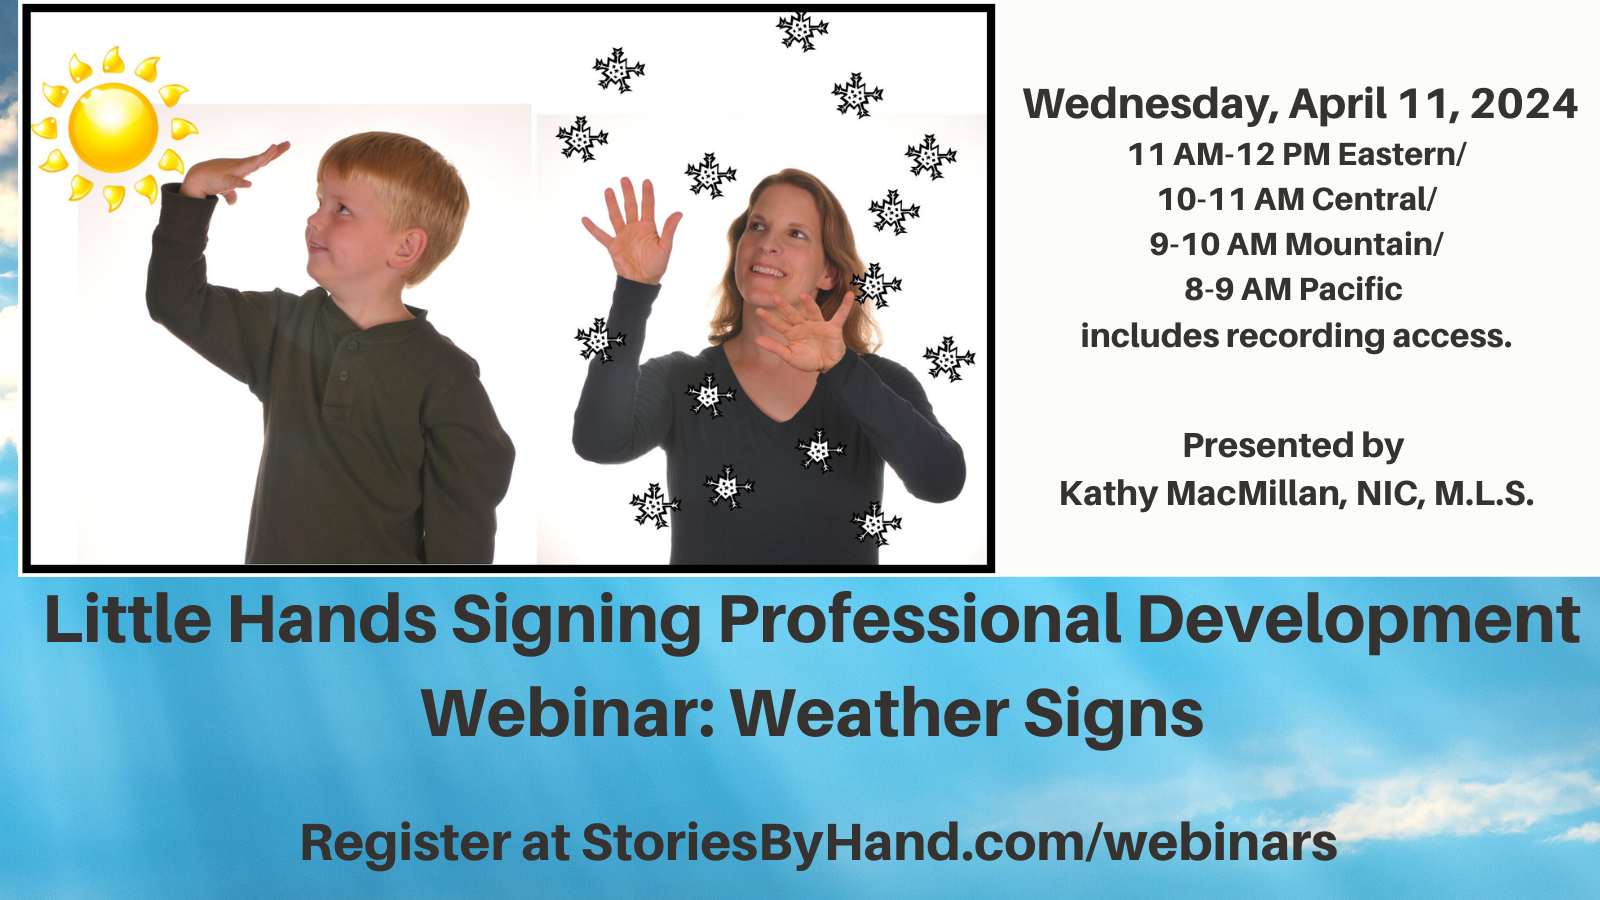 A white boy with blond hair looks up at a picture of the sun while signing SUN in American Sign Language. A white woman with light brown hair and glasses looks up at a picture of snow while signing SNOW in American Sign Language. Text reads: Little Hands Signing Professional Development Webinar: Weather Signs. Wednesday, April 11, 2024. 11 AM-12 PM Eastern/10-11 AM Central/9-10 AM Mountain/8-9 AM Pacific. Presented by Kathy MacMillan, NIC, M.L.S. Register at StoriesByHand.com/webinars. Includes recording access. Presented by Kathy MacMillan, NIC, M.L.S. StoriesByHand.com/webinars.